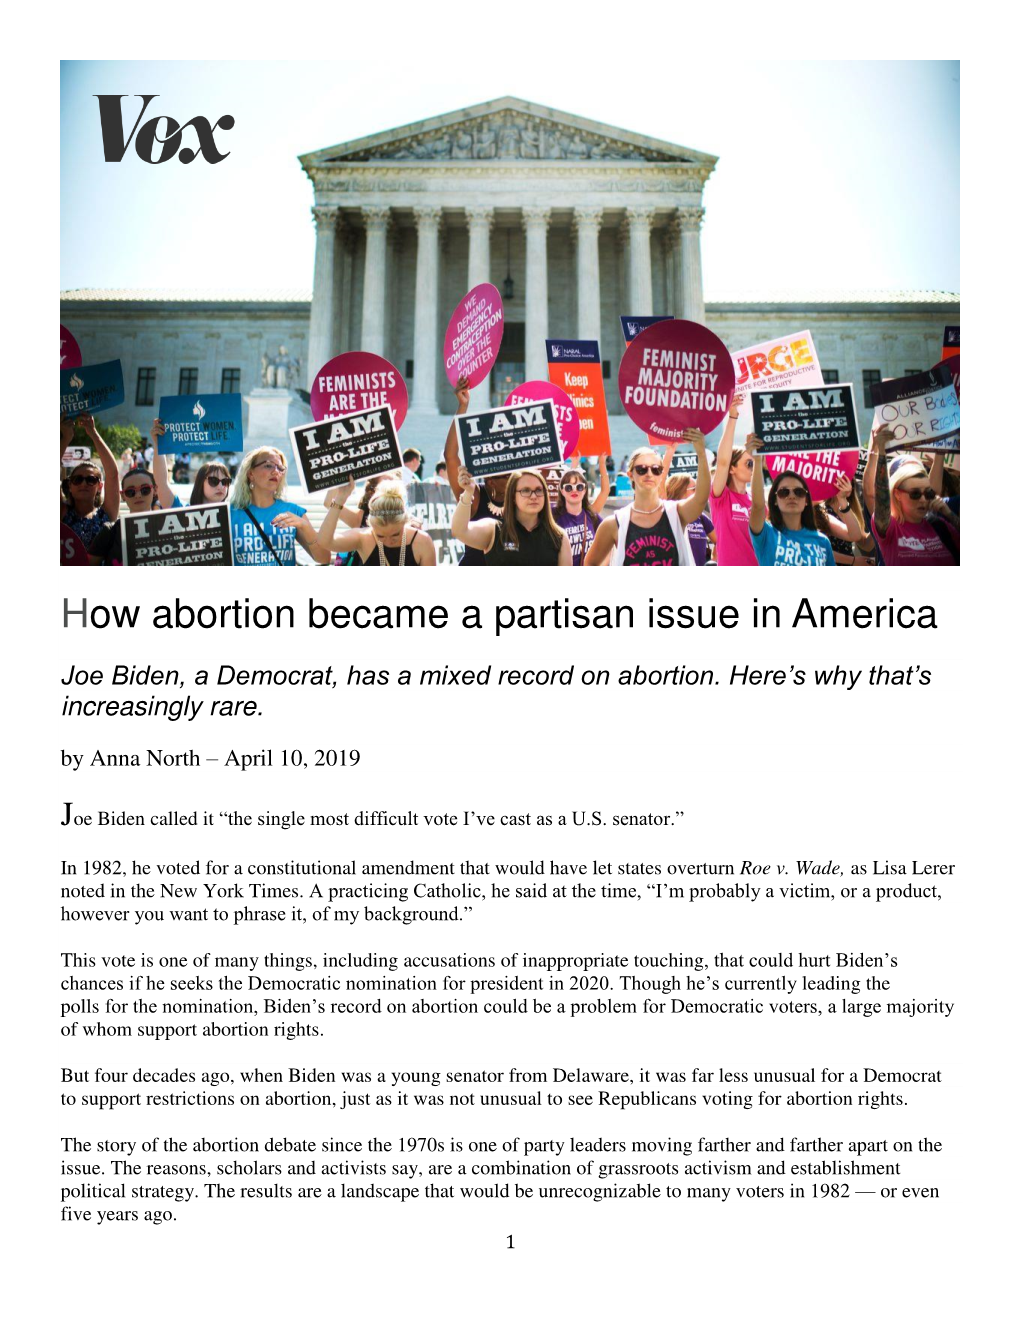 How Abortion Became a Partisan Issue in America